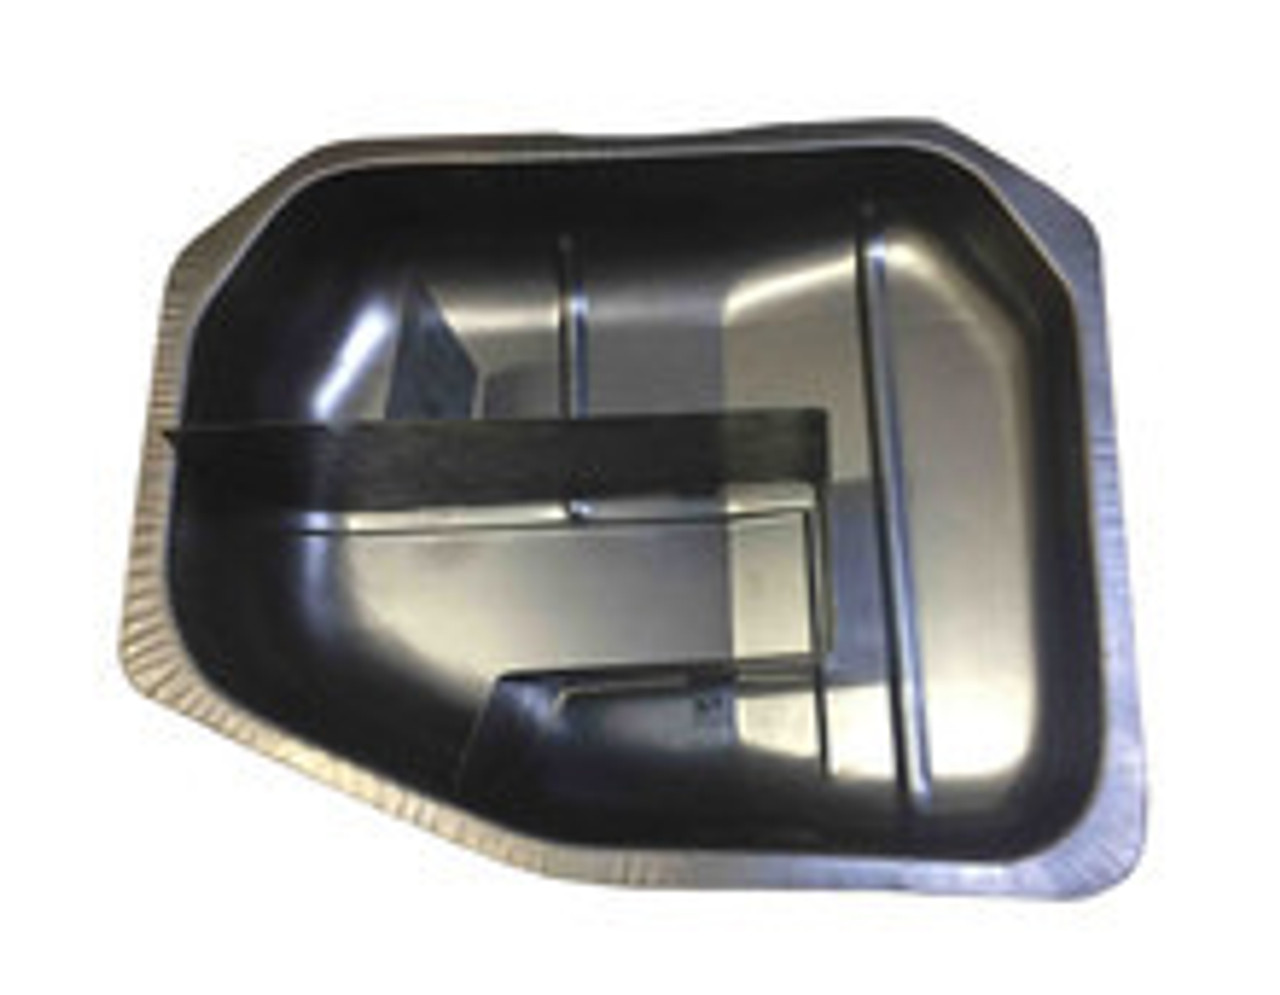 New electrogalvanized fuel or gas tank with OE style baffled design - 4149807
FIAT 124 Spider and Sport Coupe - 1966-1969 
Also fits non-emissions models from outside of North America - 1966-1975 - Auto Ricambi